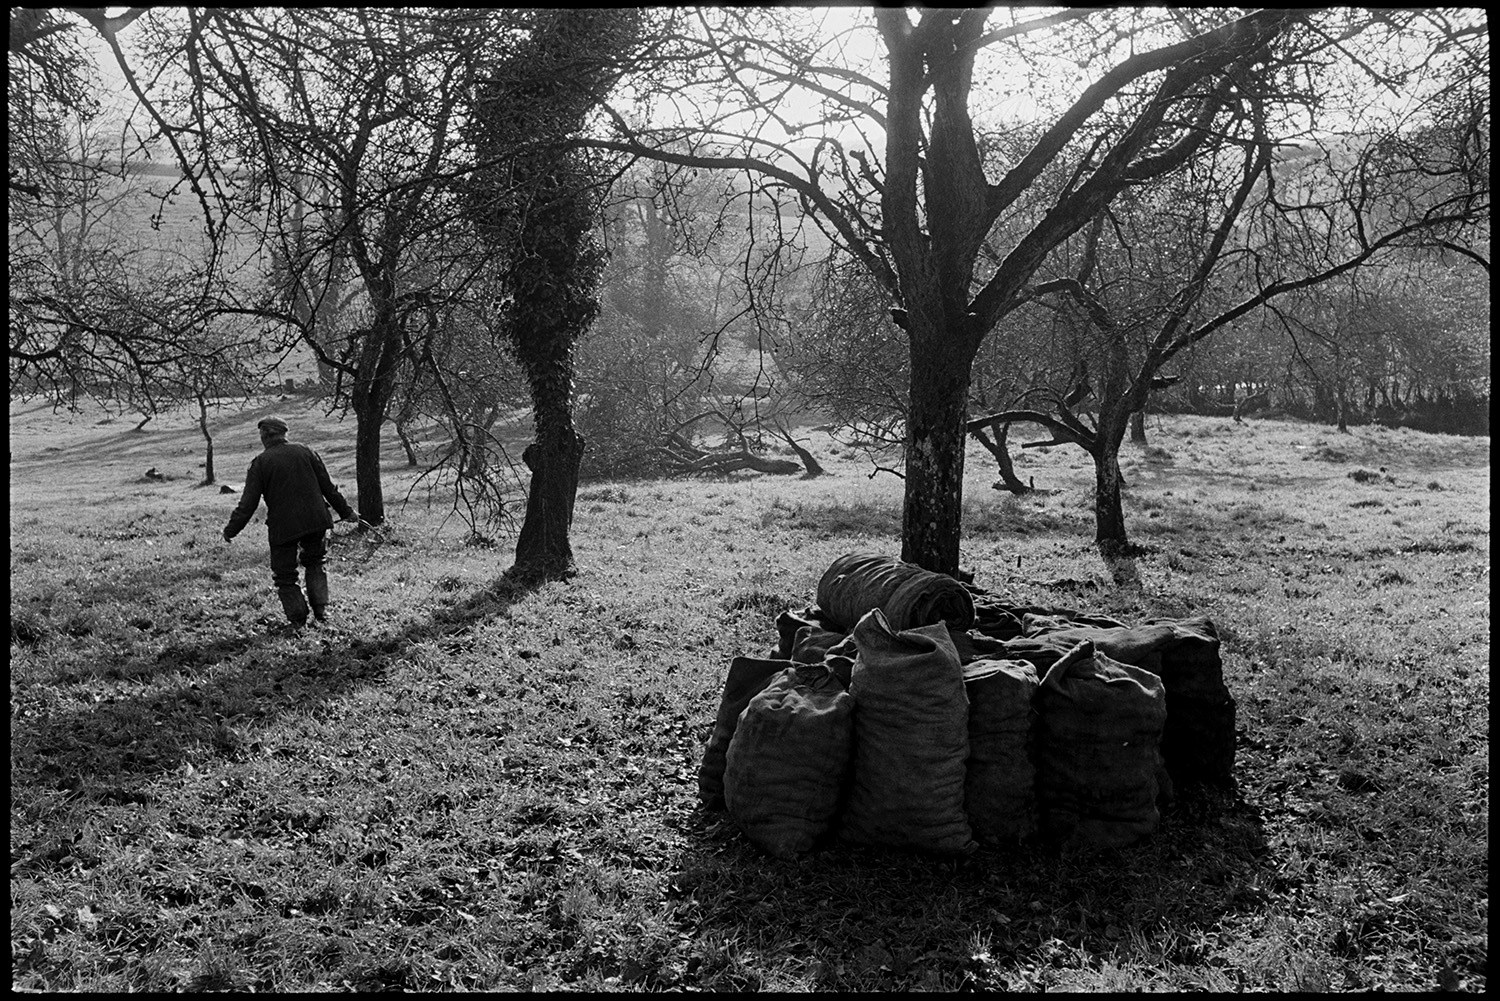 Cider orchard, man picking up apples and bagging them up.
[Bill Lott walking in a cider orchard at Westpark, Iddesleigh to collect apples in a basket. Full sacks of apples are stacked around a tree.]